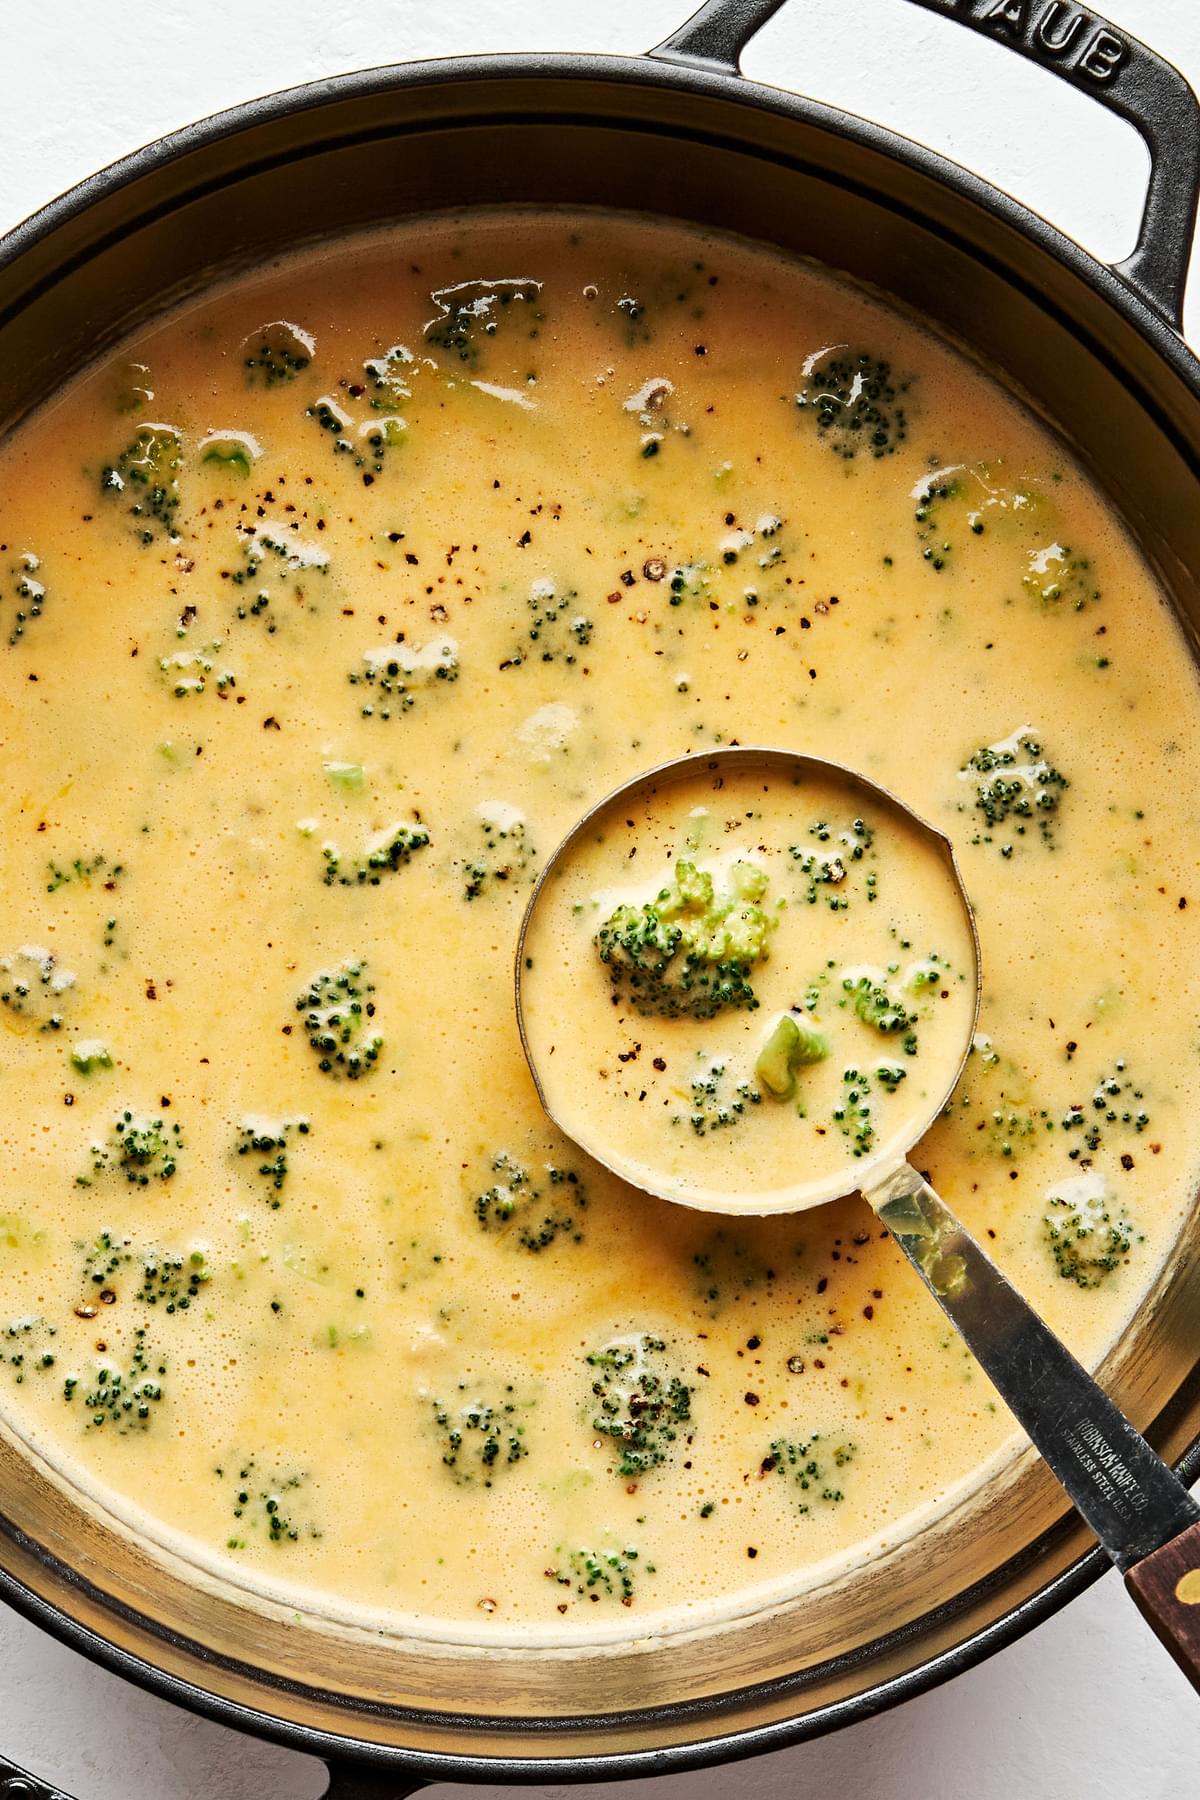 a pot of homemade broccoli cheddar soup being scooped with a ladle